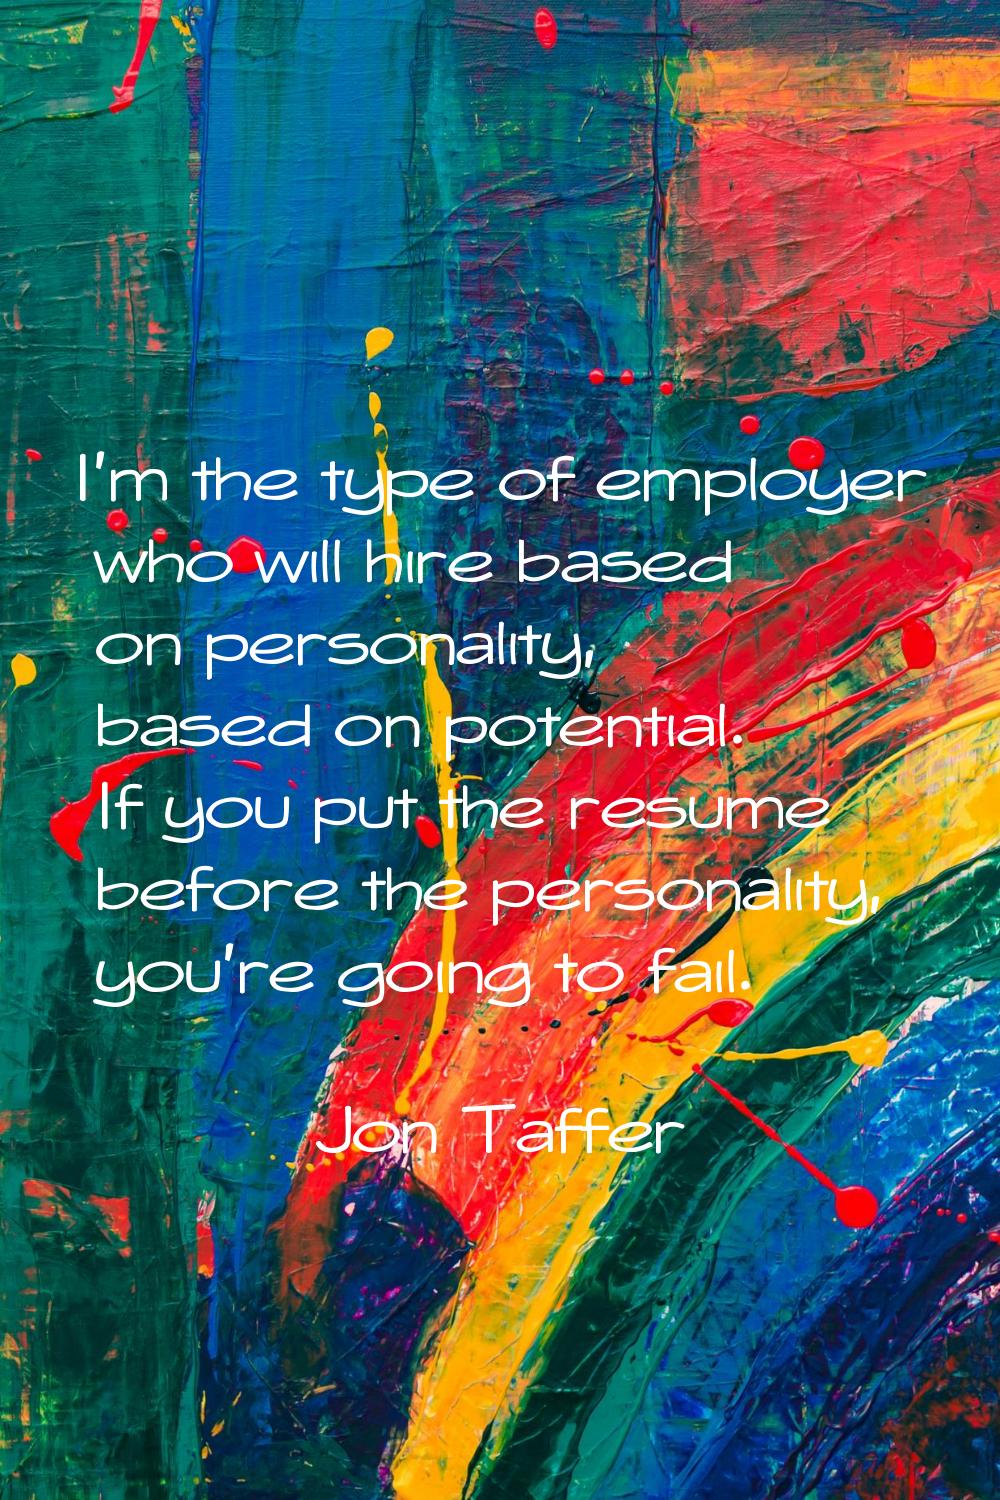 I'm the type of employer who will hire based on personality, based on potential. If you put the res